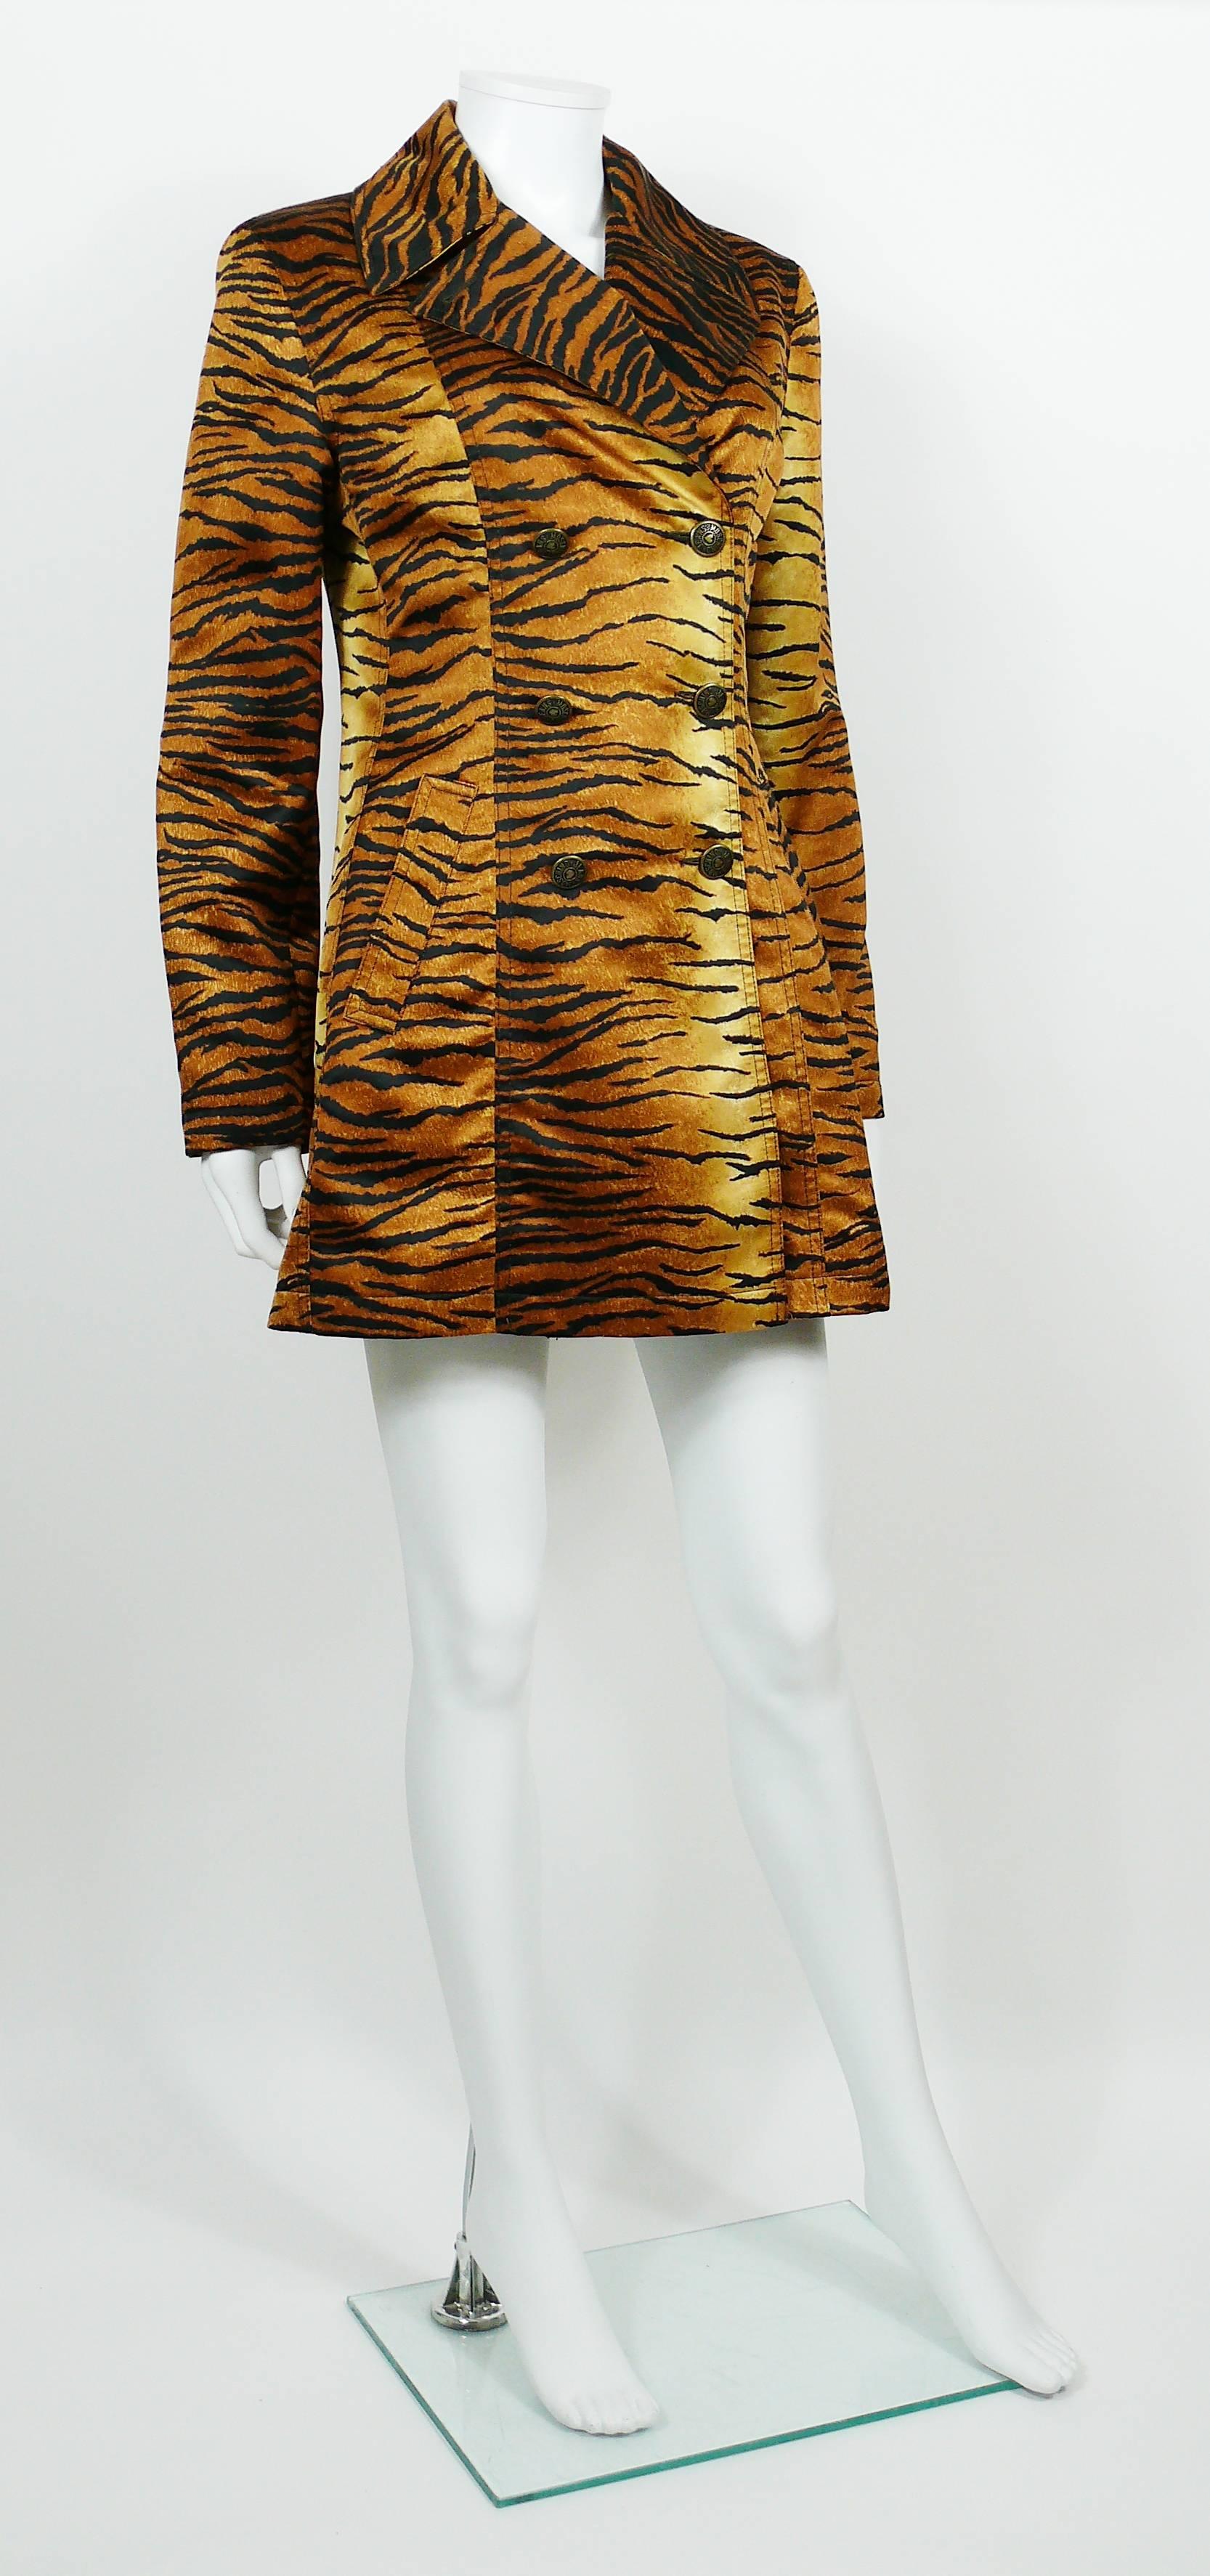 MOSCHINO JEANS vintage tiger print double breasted long jacket.

This jacket features :
- Button front fastening.
- Long sleeves.
- Lapel collar.
- Fully lined.
- Two pockets.

Label reads MOSCHINO JEANS Made in Italy.

Size tag reads : I 42 / USA 8